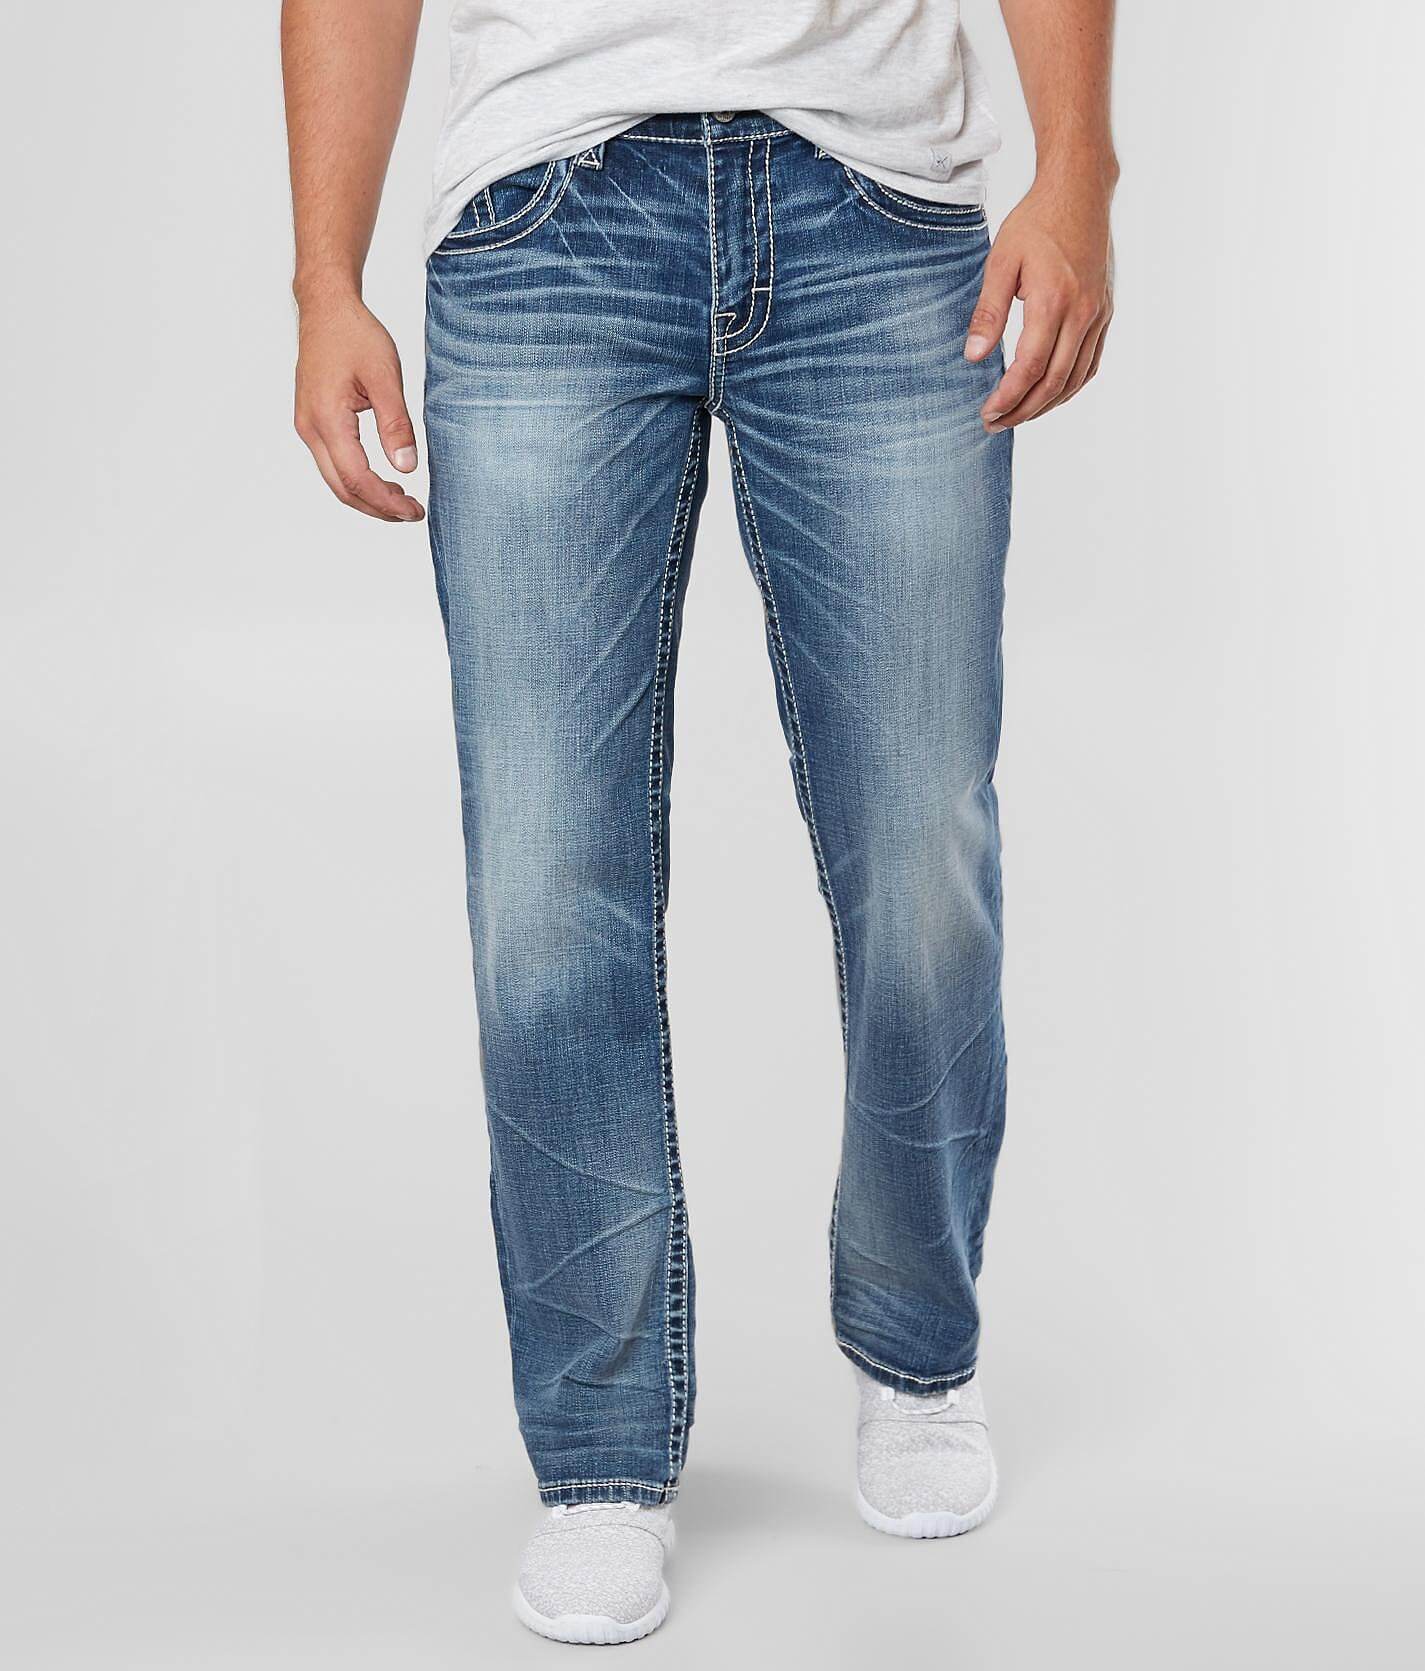 buckle jeans price